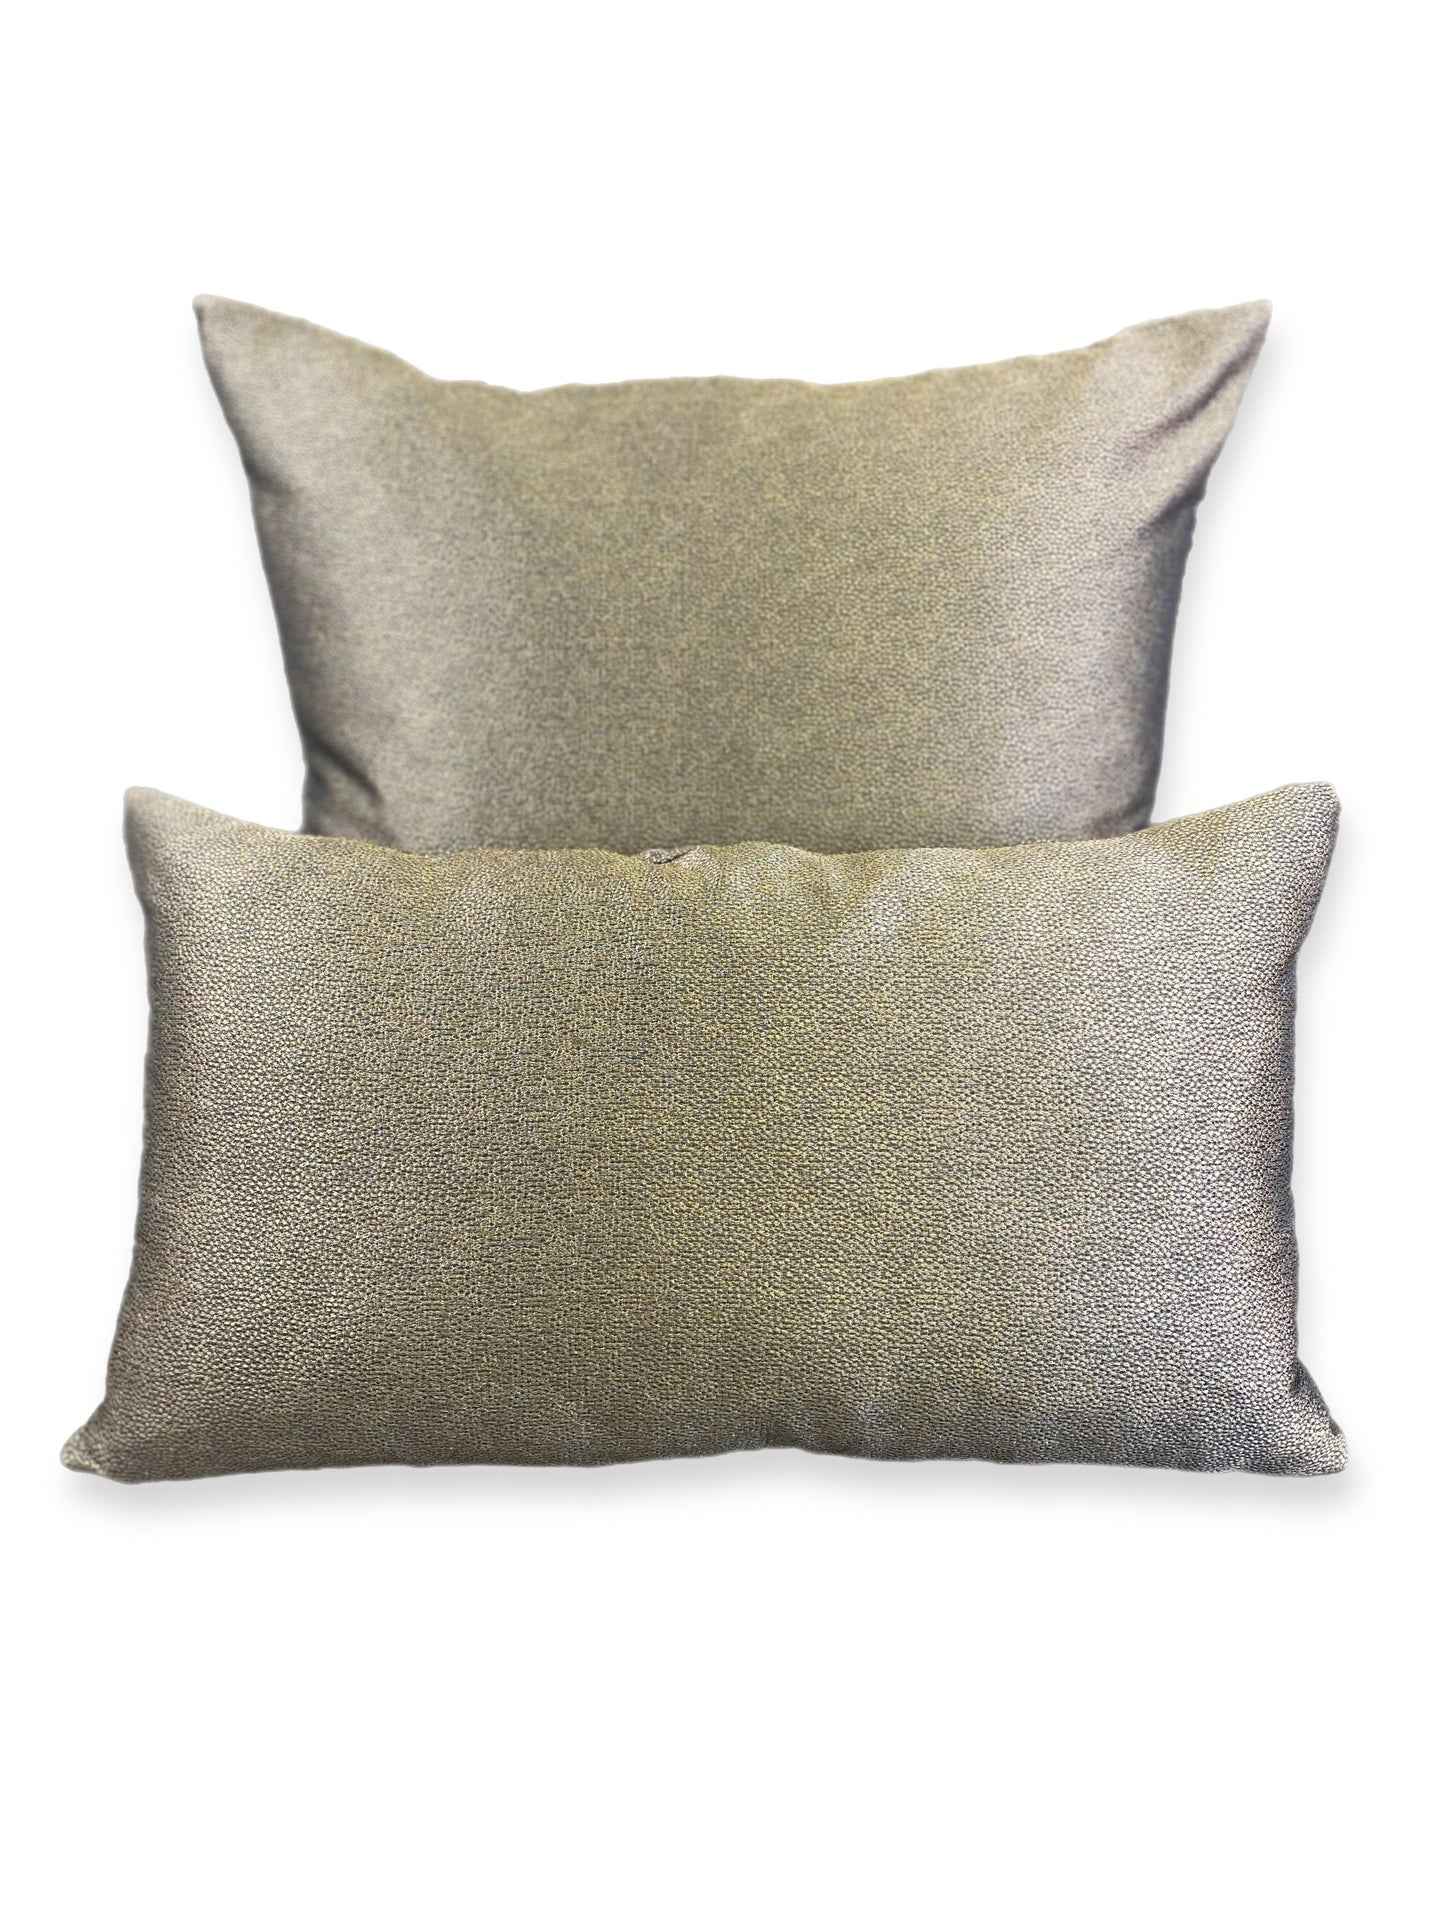 Luxury Lumbar Pillow - 24" x 14" -  Gold Hide; A shimmer of duotone gold and brown dimples